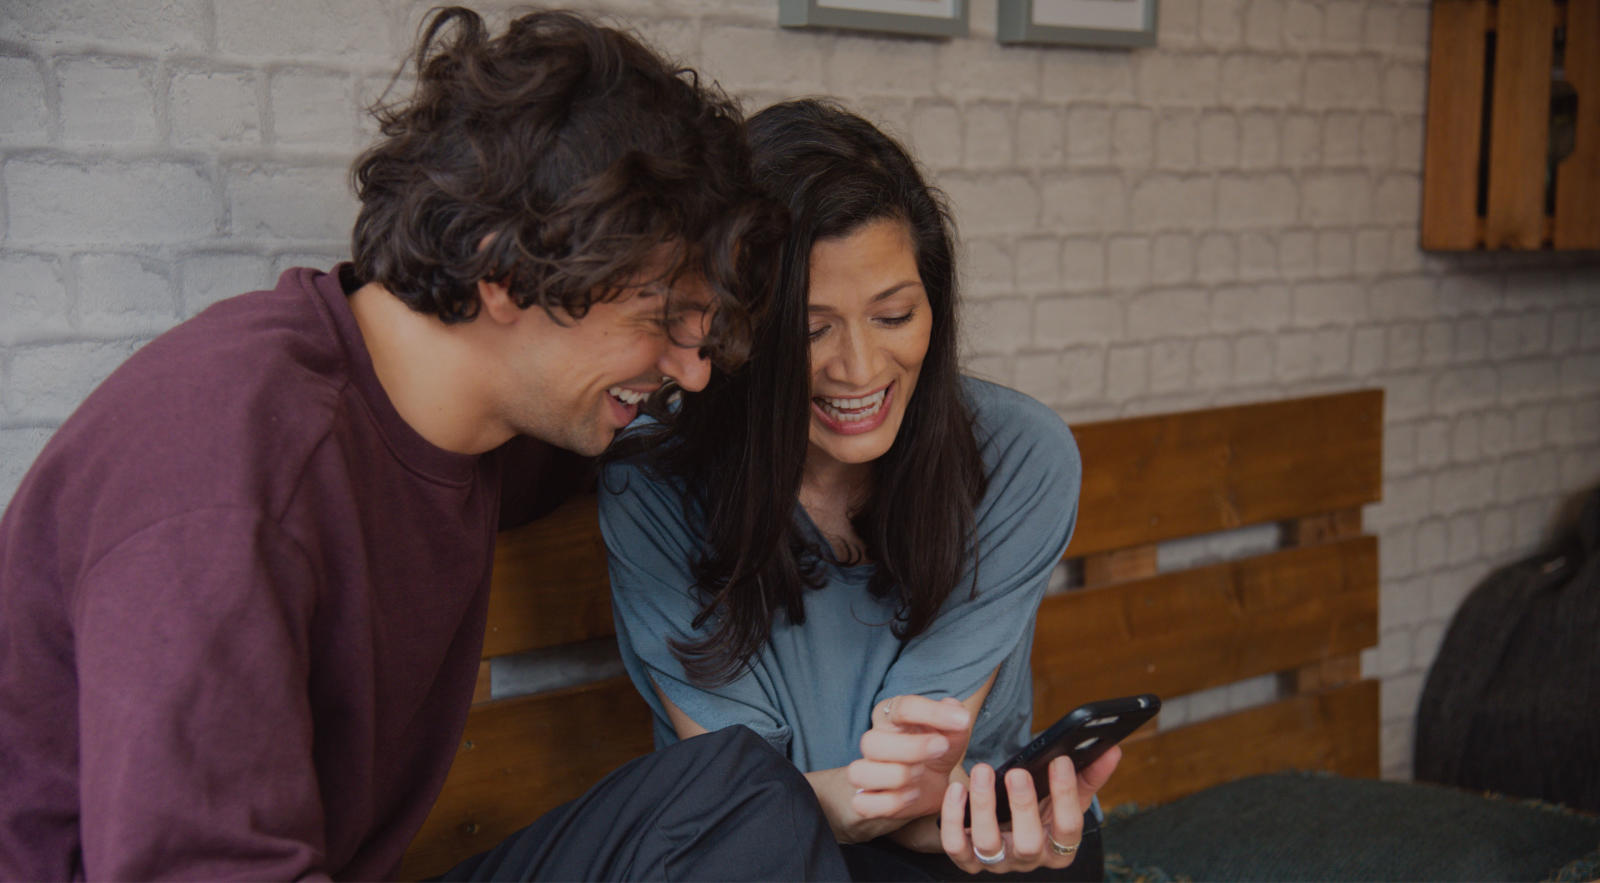 Man and lady sat down, both looking at a mobile phone together and smiling